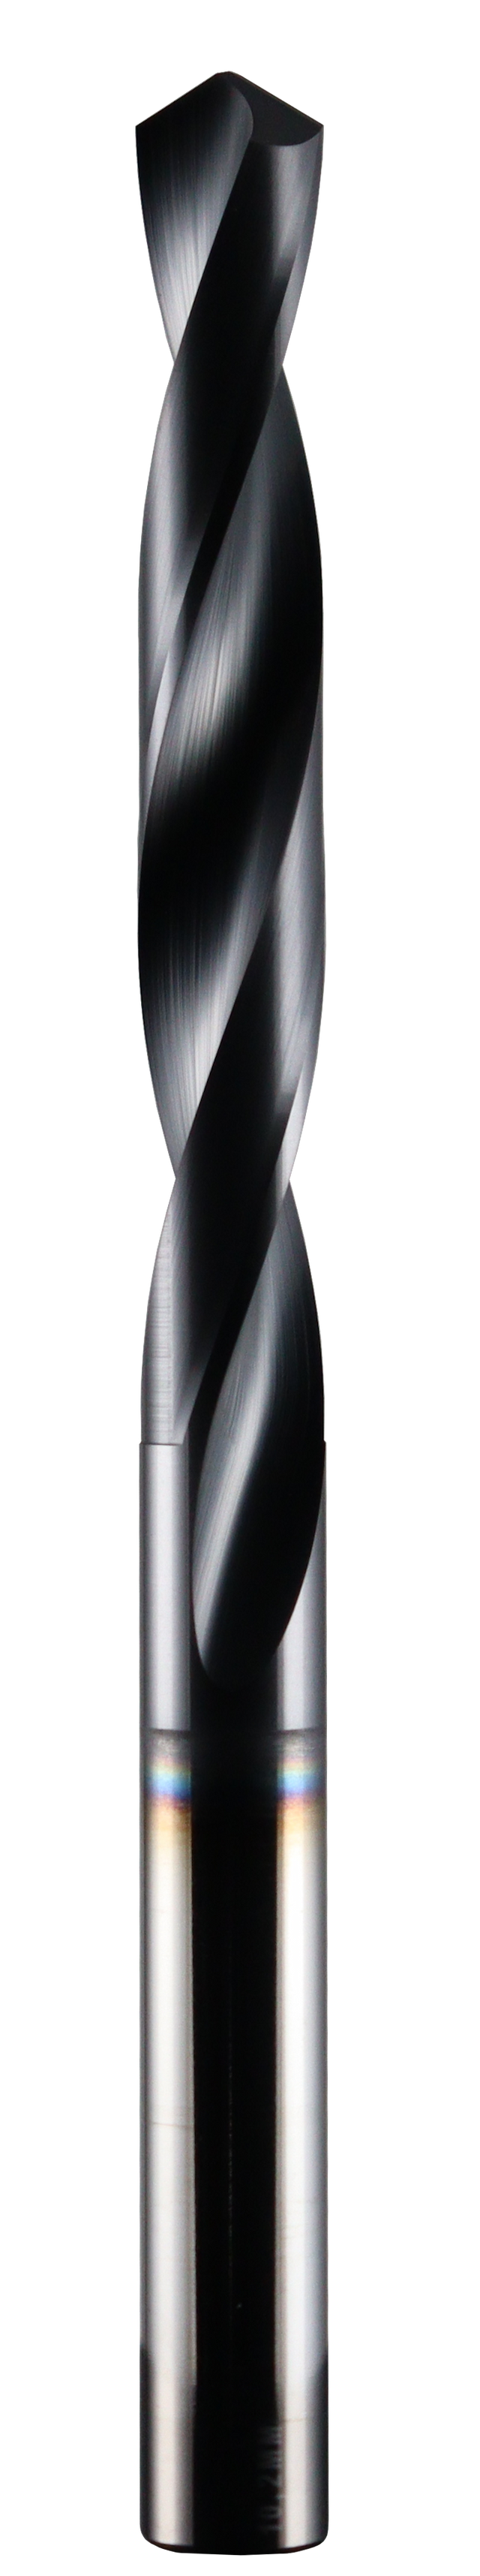 10.20mm Dia, 118 Degree Point, Solid Carbide Drill - 68366